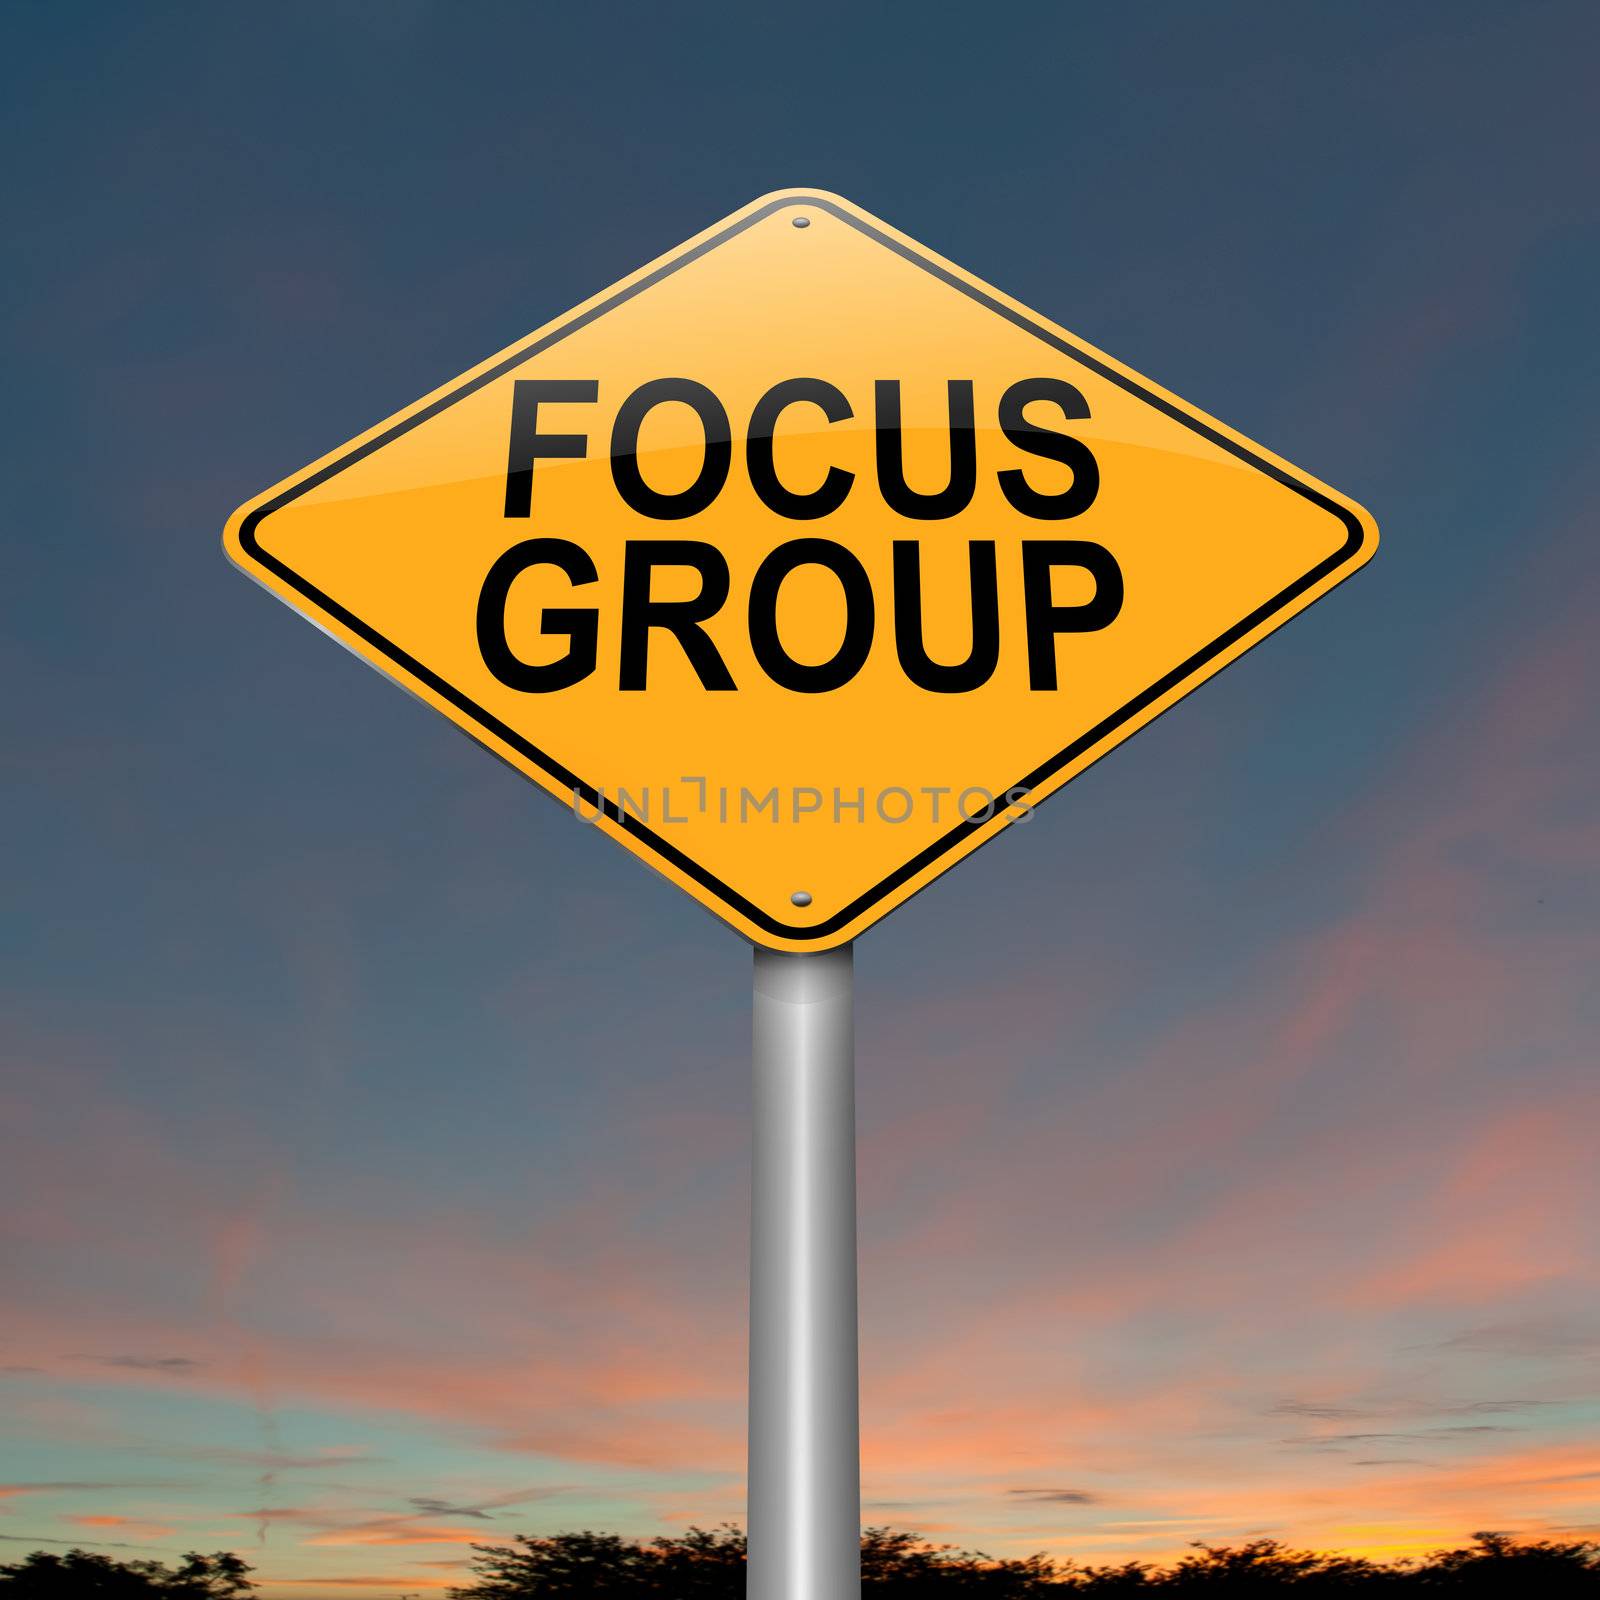 Illustration depicting a roadsign with a focus group concept. Sky background.